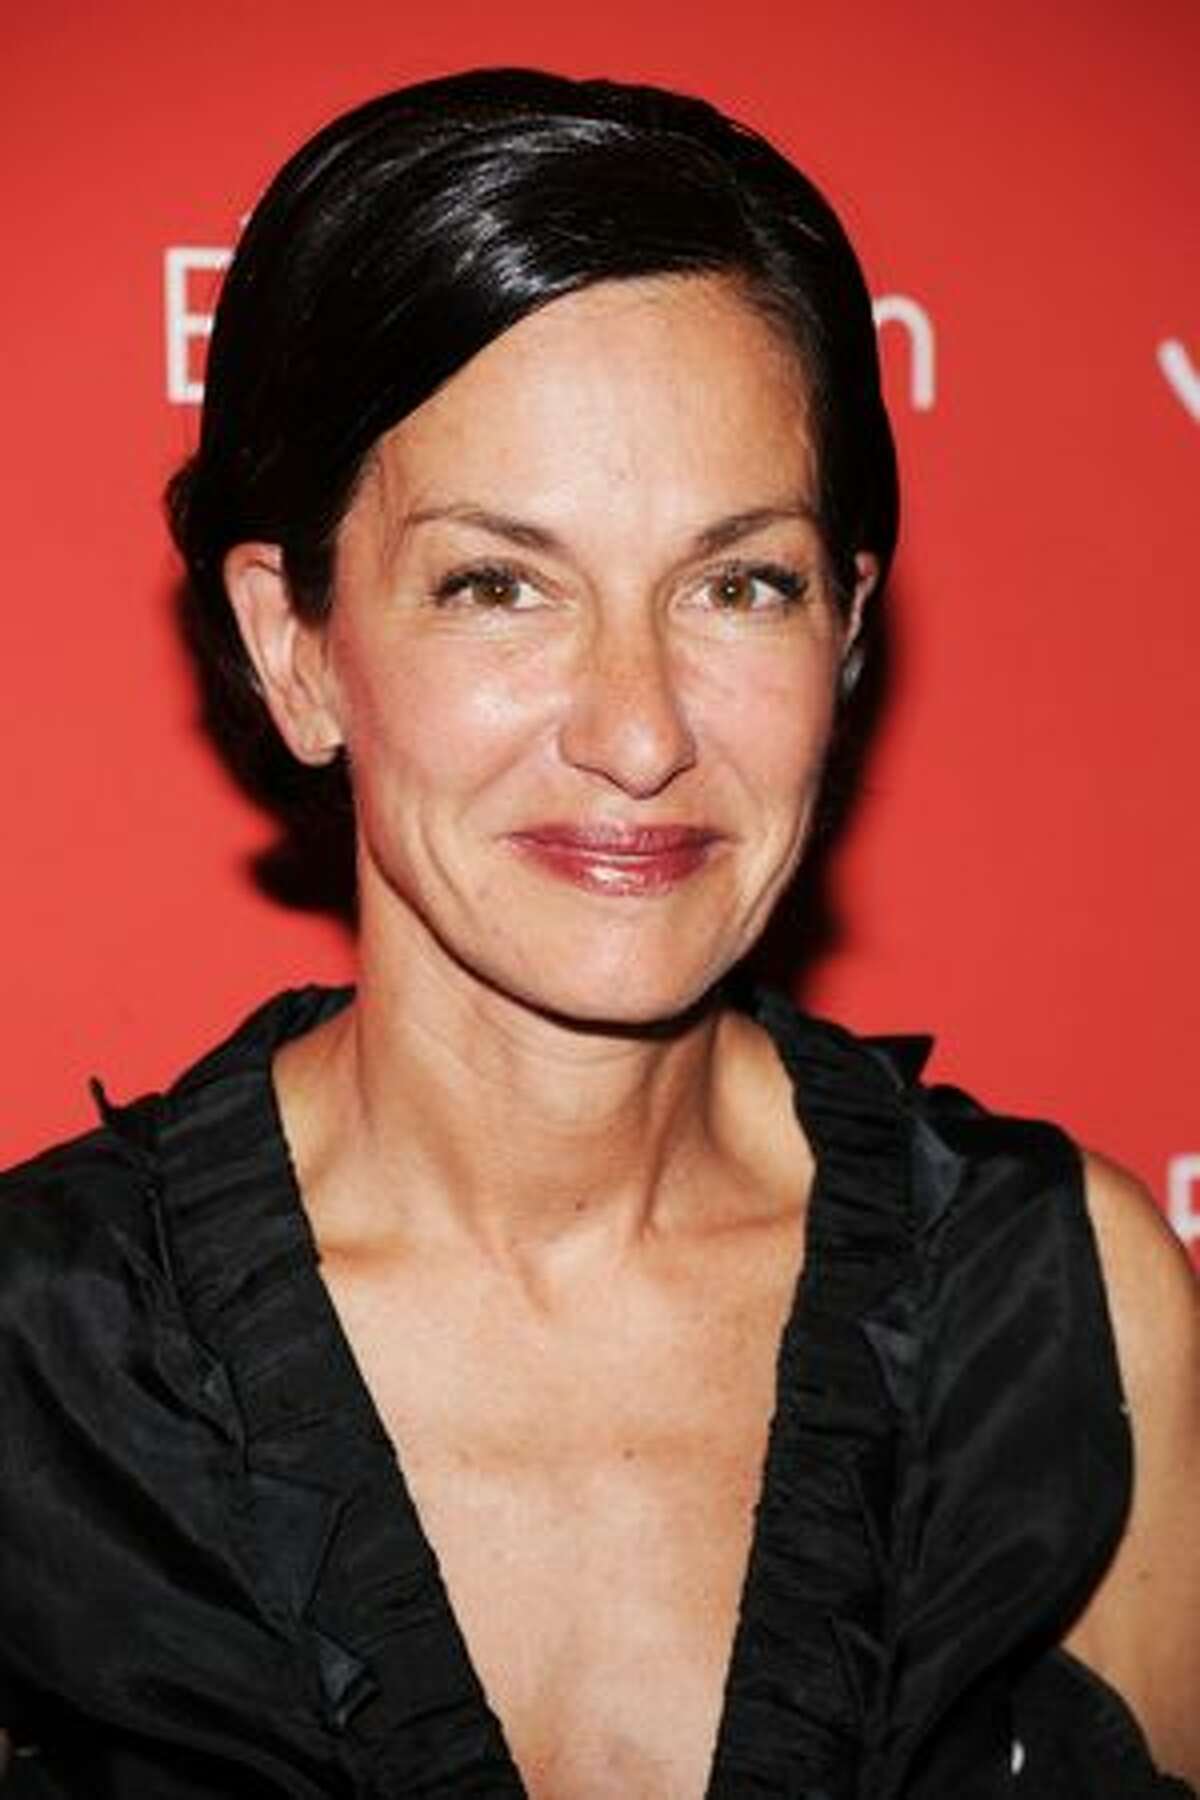 Designer Cynthia Rowley attends the premiere of "The Extra Man" at Village East Cinema in New York City.